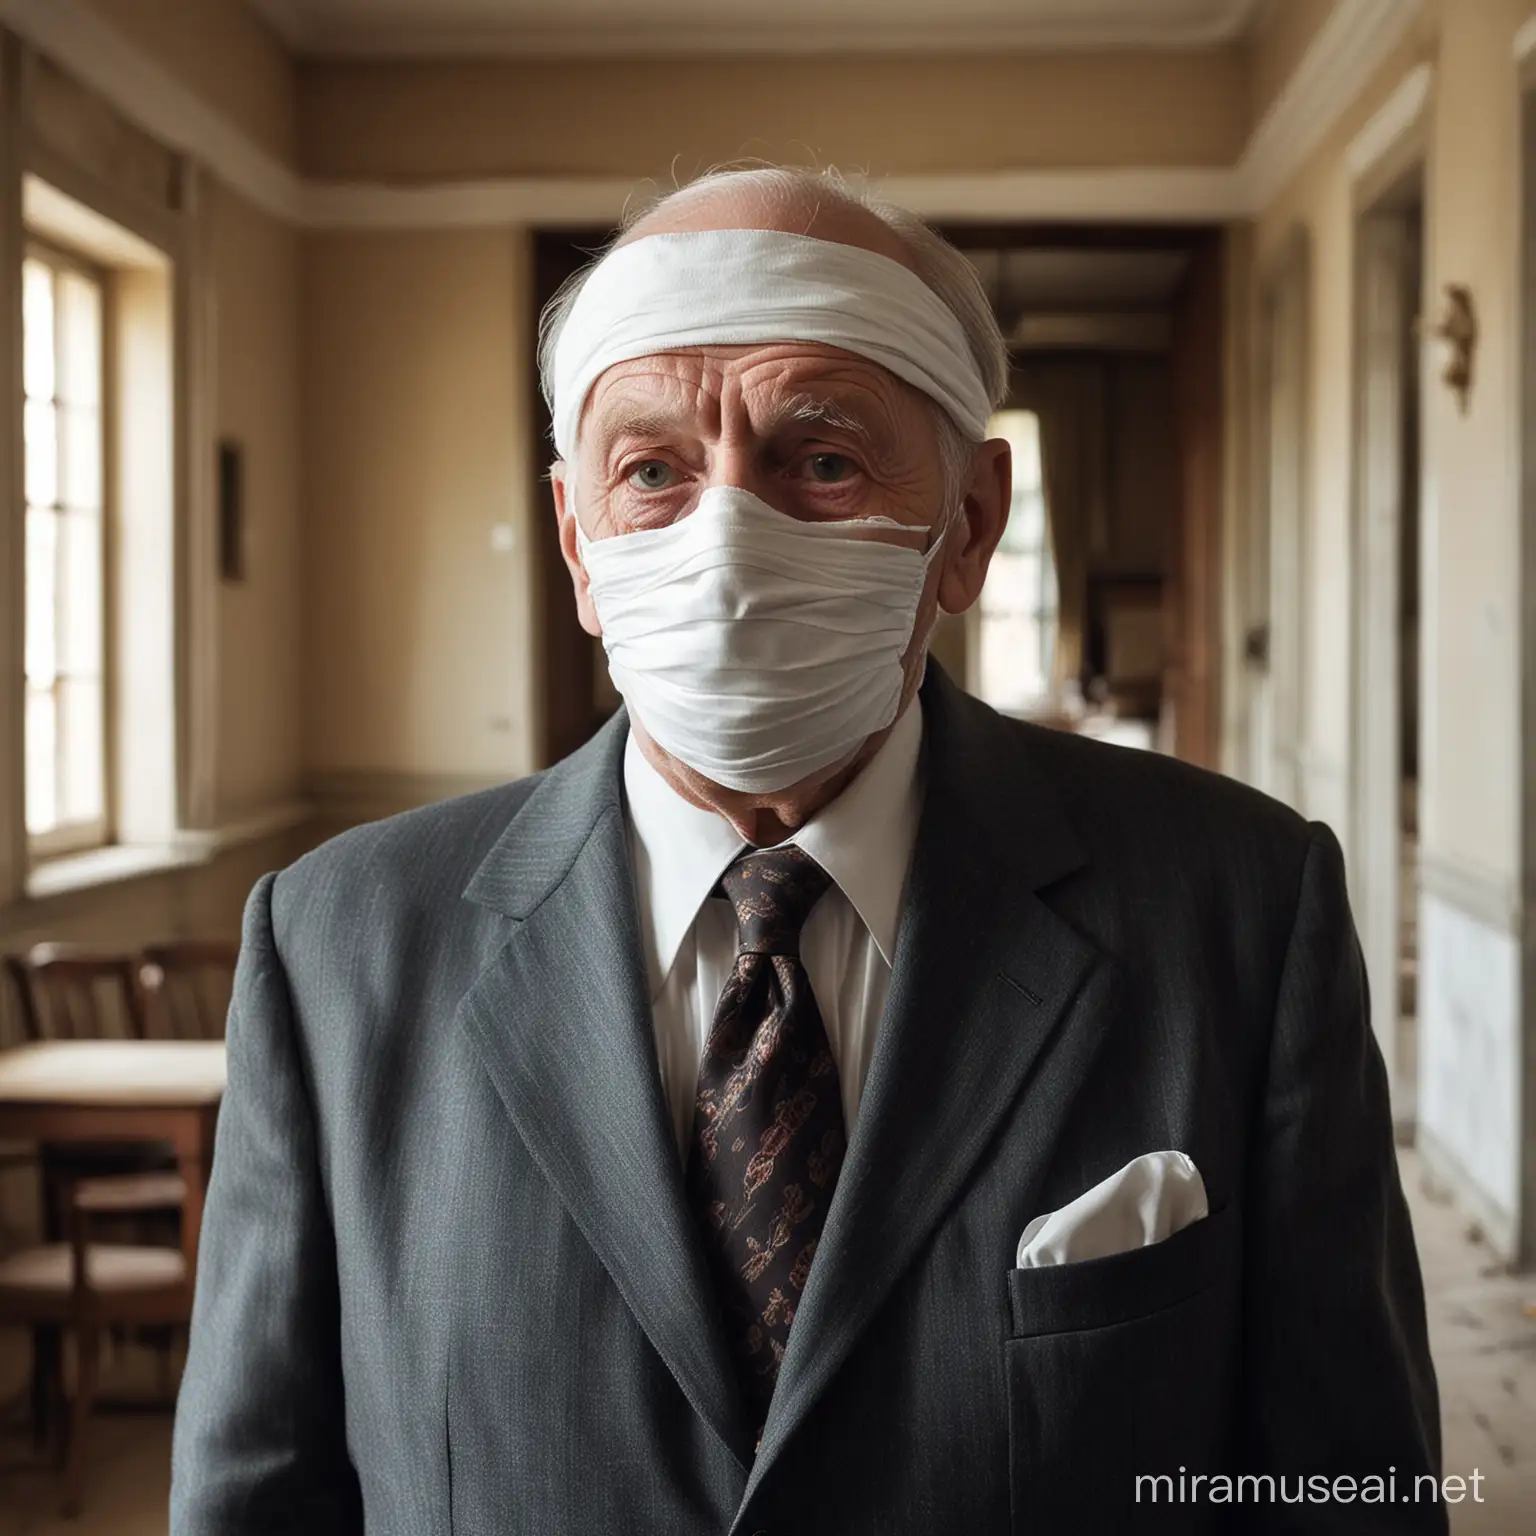 Mysterious Elderly Man in Bandages in Old Mansion